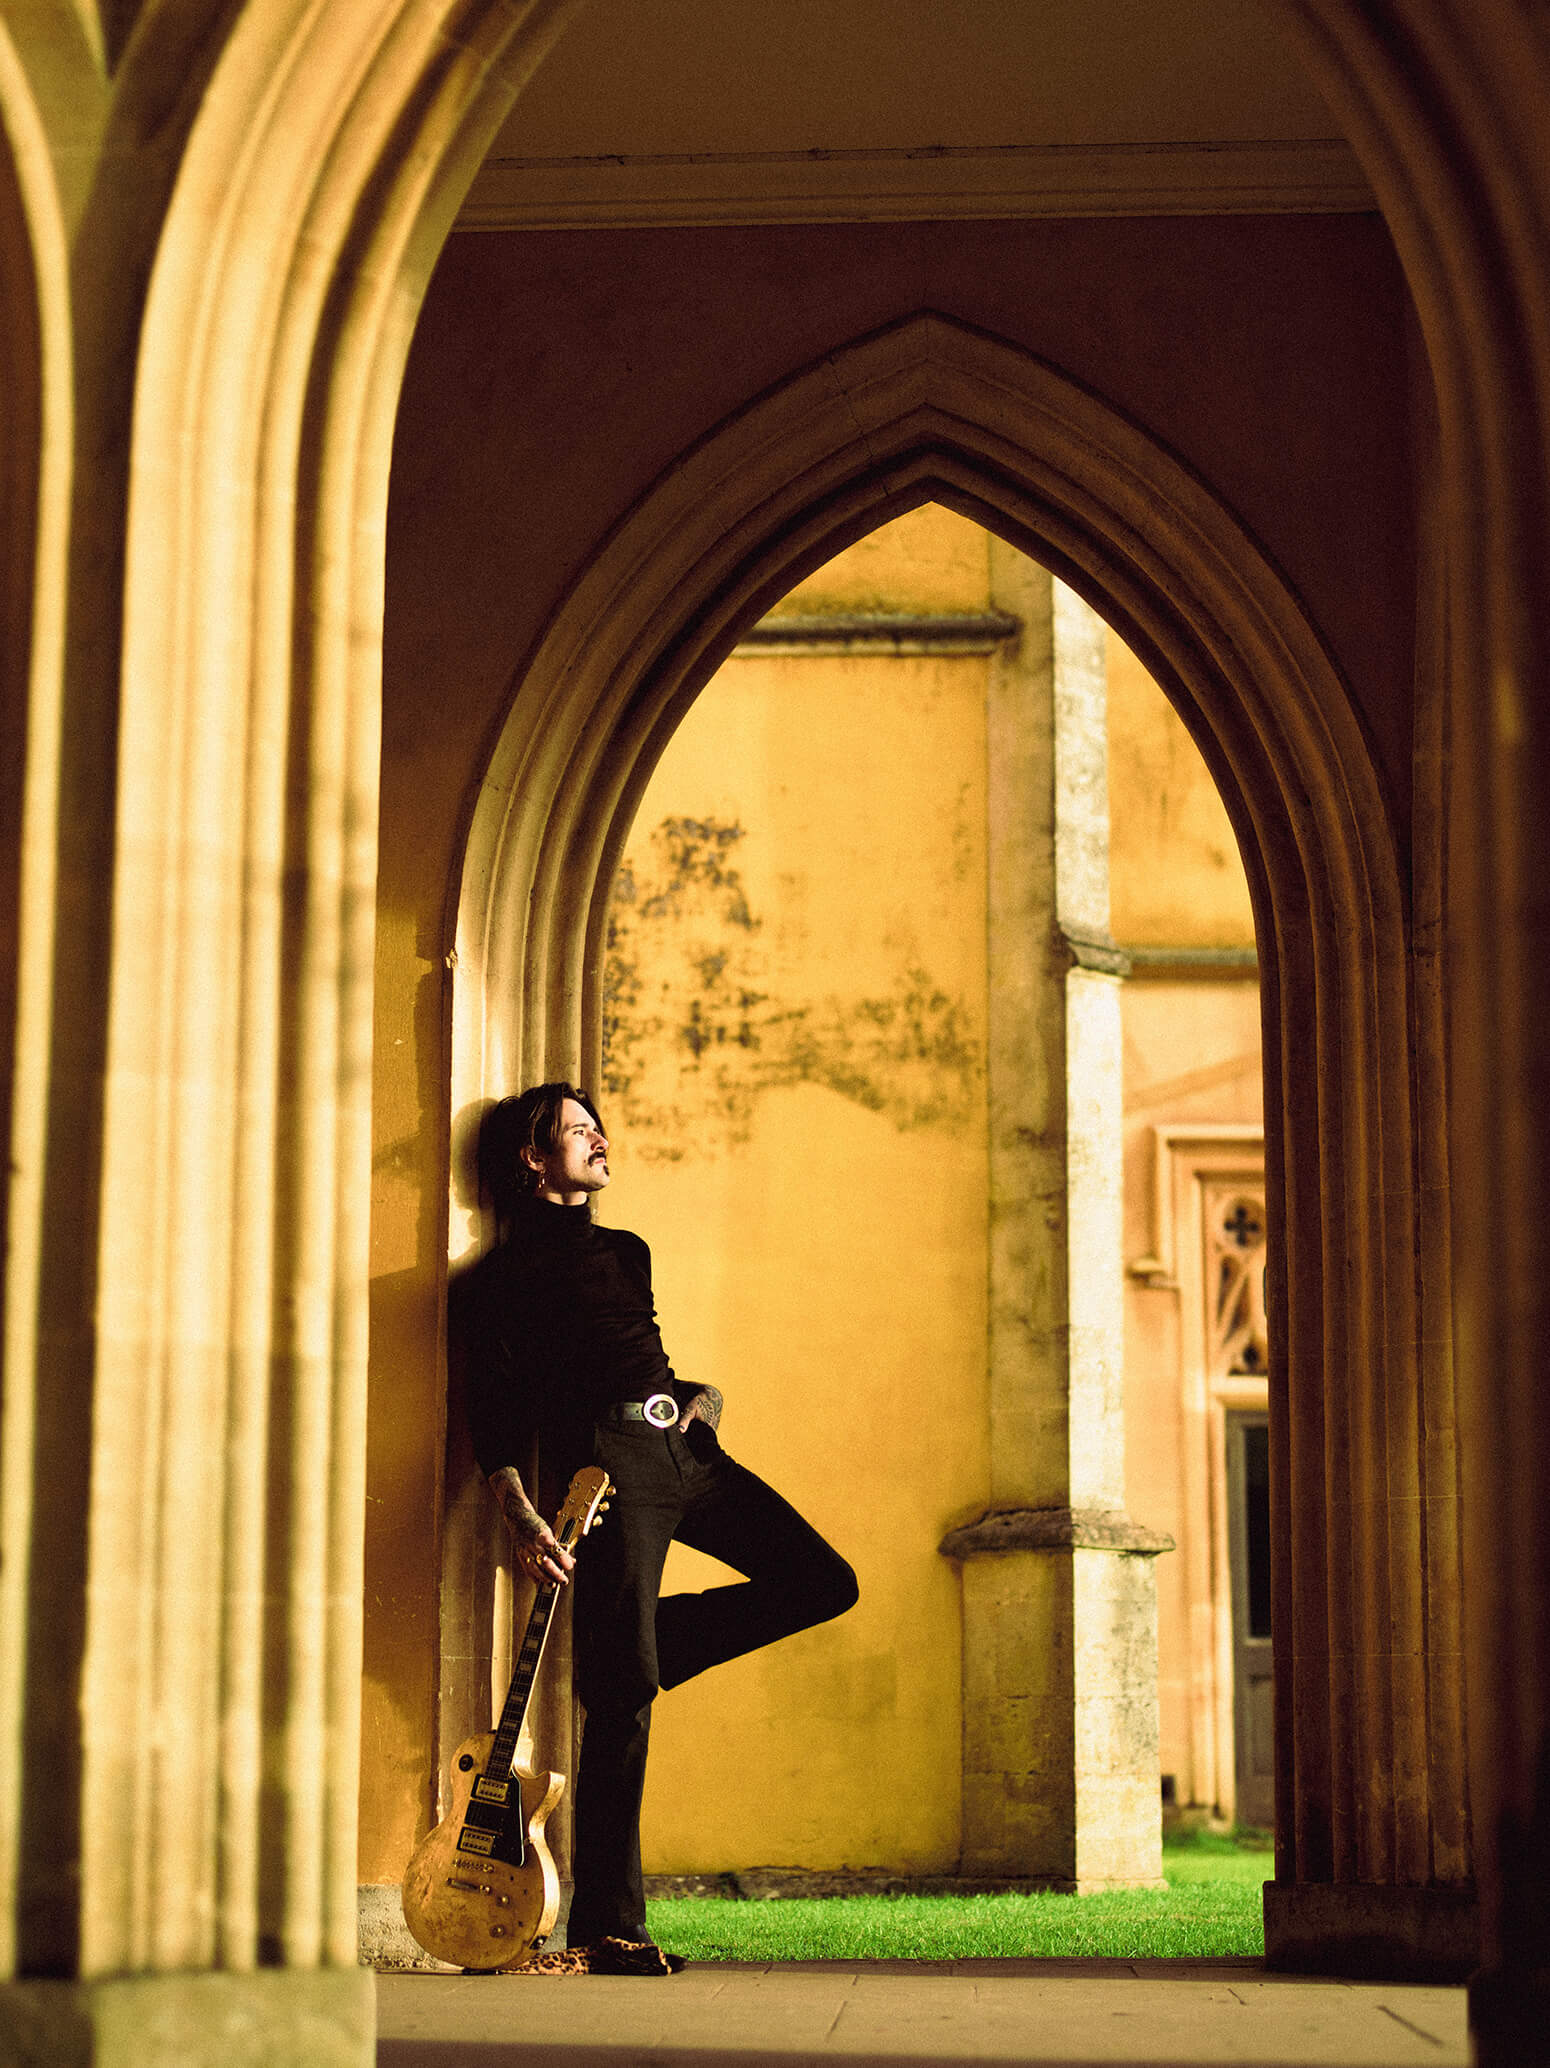 An Image of Stanley Duke standing in an Archway